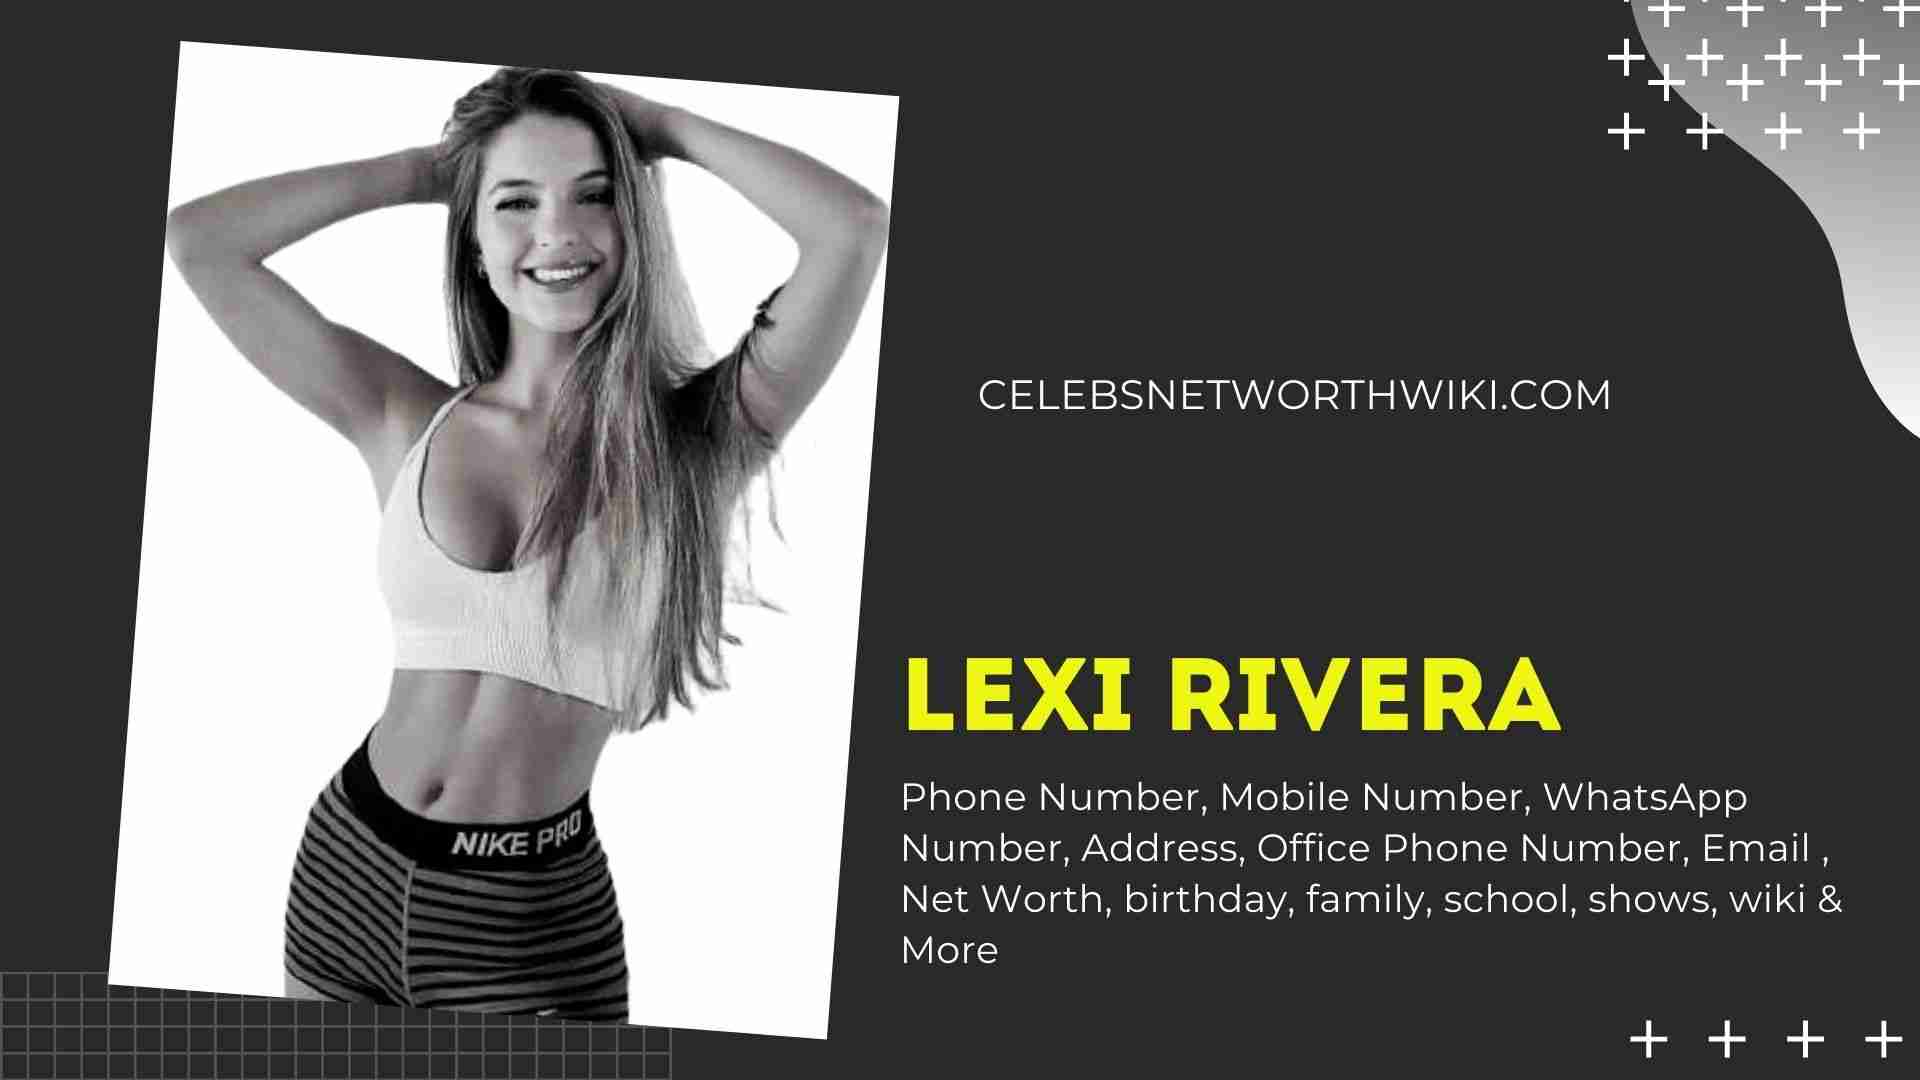 Who is lexi rivera dating in 2021